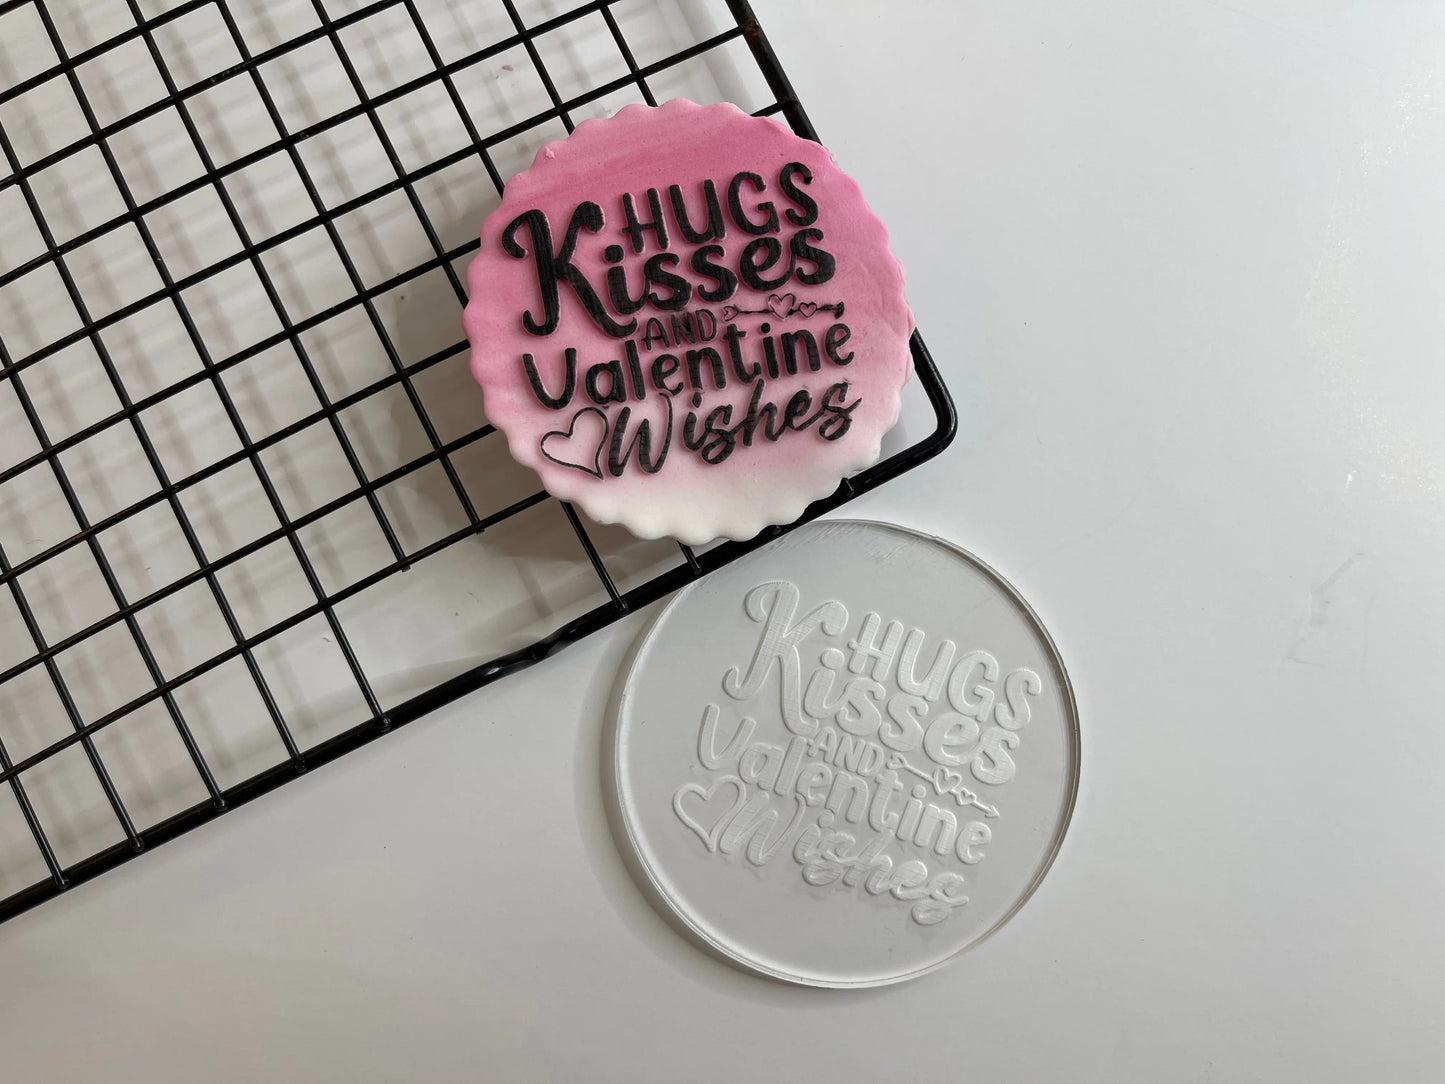 Valentine's day - Debossing - Hugs kisses and Valentine wishes MEG cookie cutters